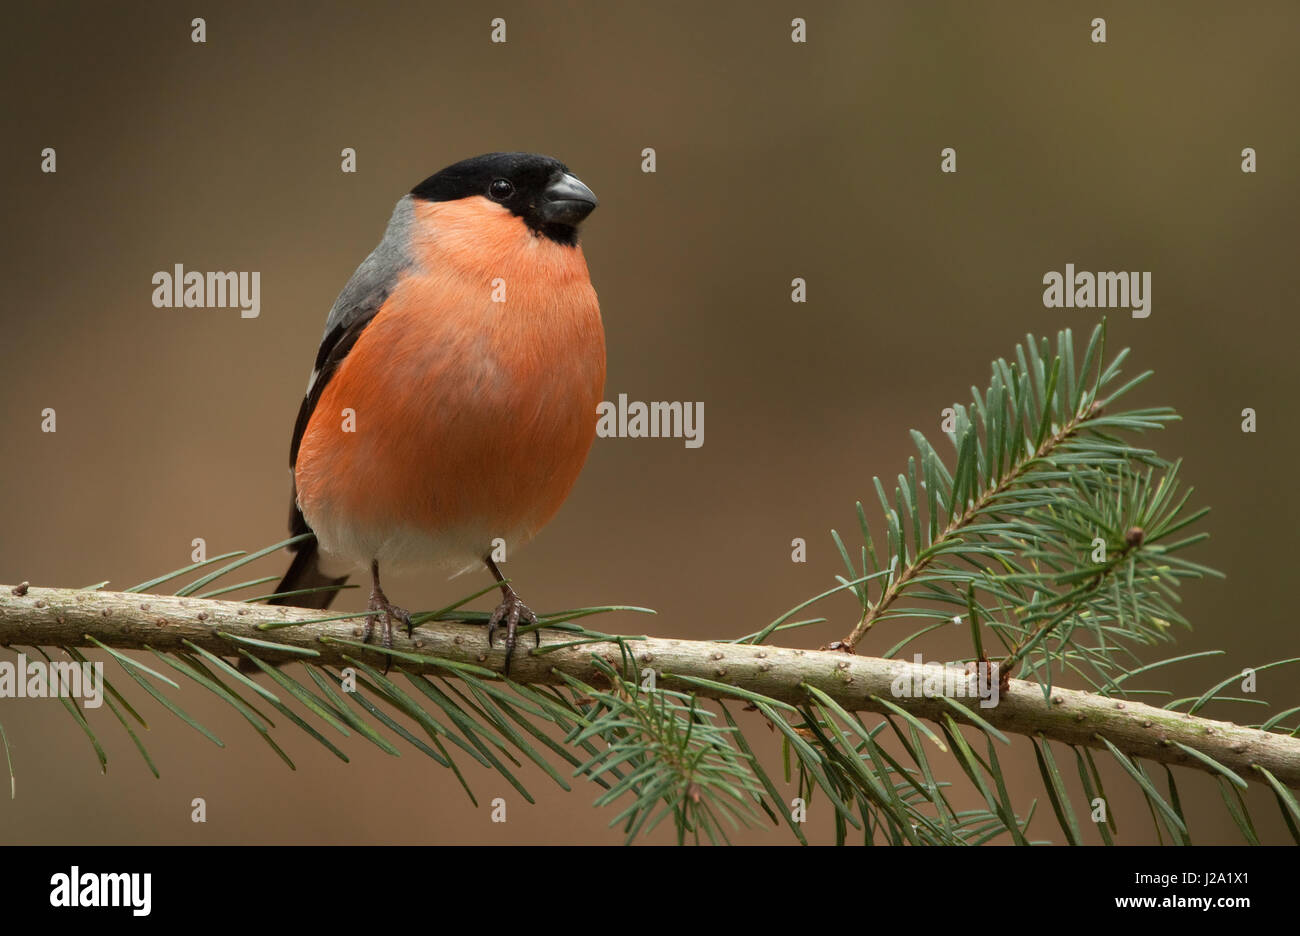 Male Bullfinch perched on branch Stock Photo